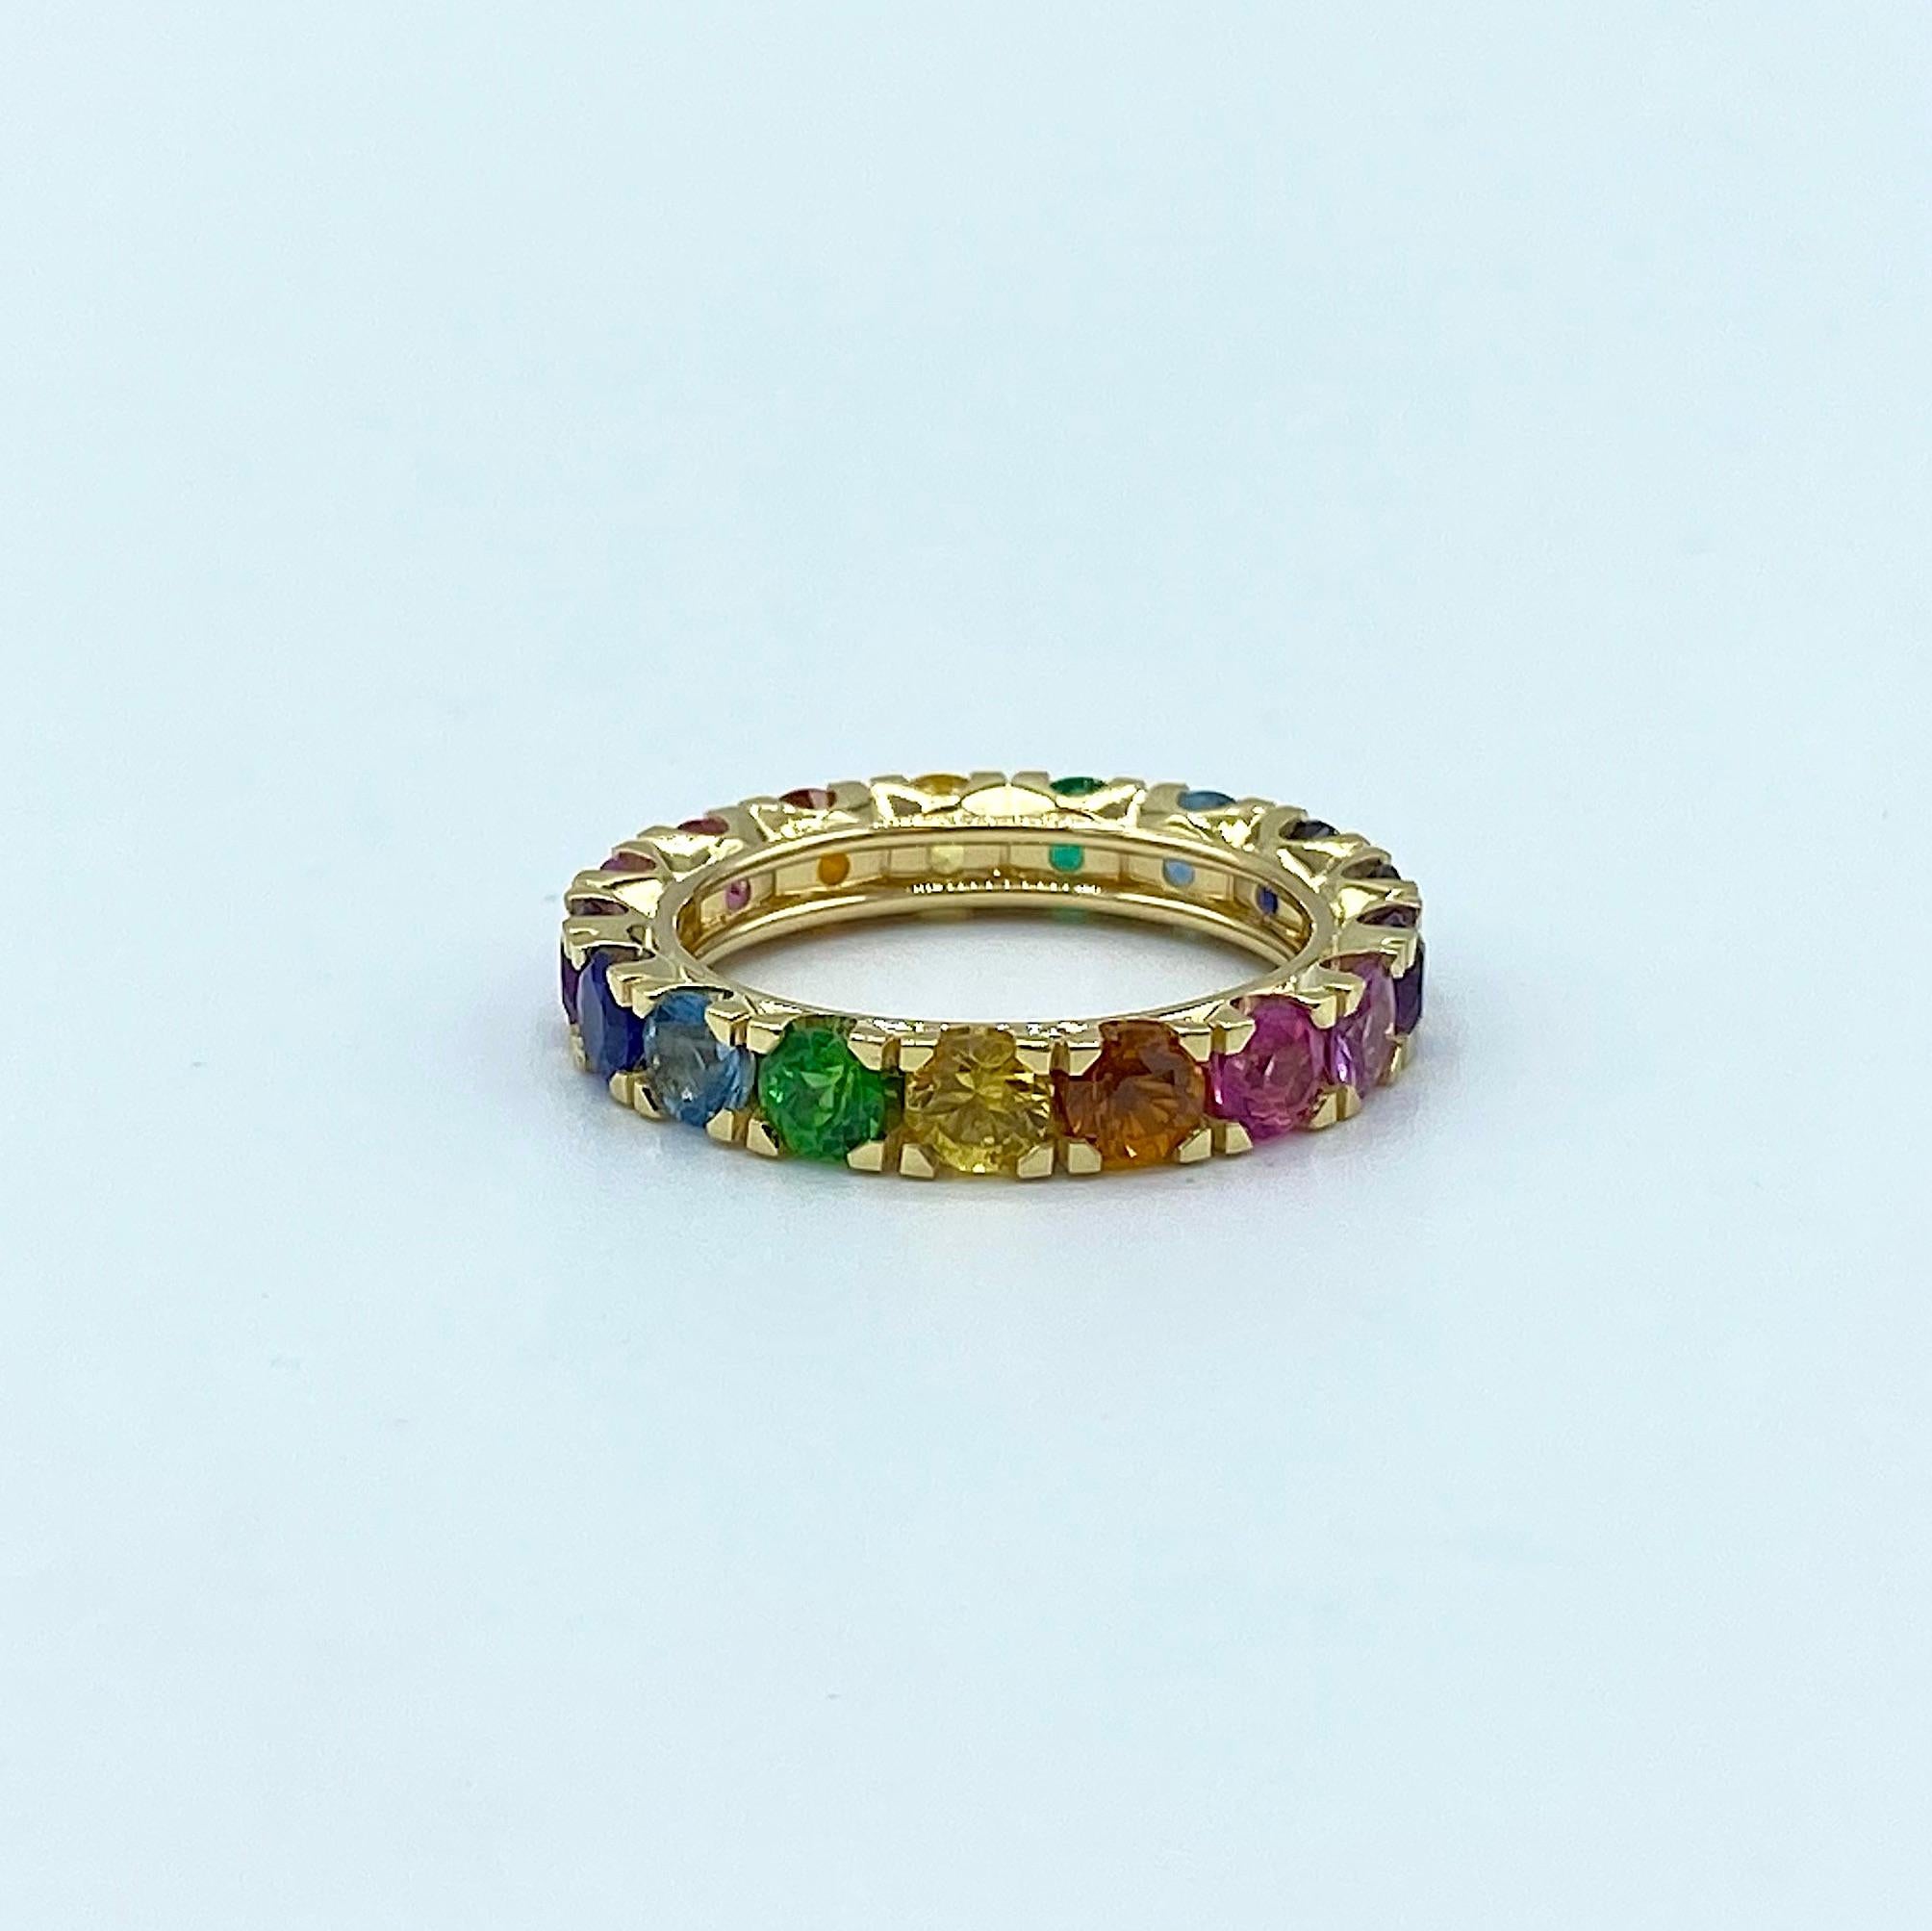 Rainbow Sapphire Emerald Semiprecious Stone Made in Italy 18 Karat Gold Ring  In New Condition For Sale In Bussolengo, Verona